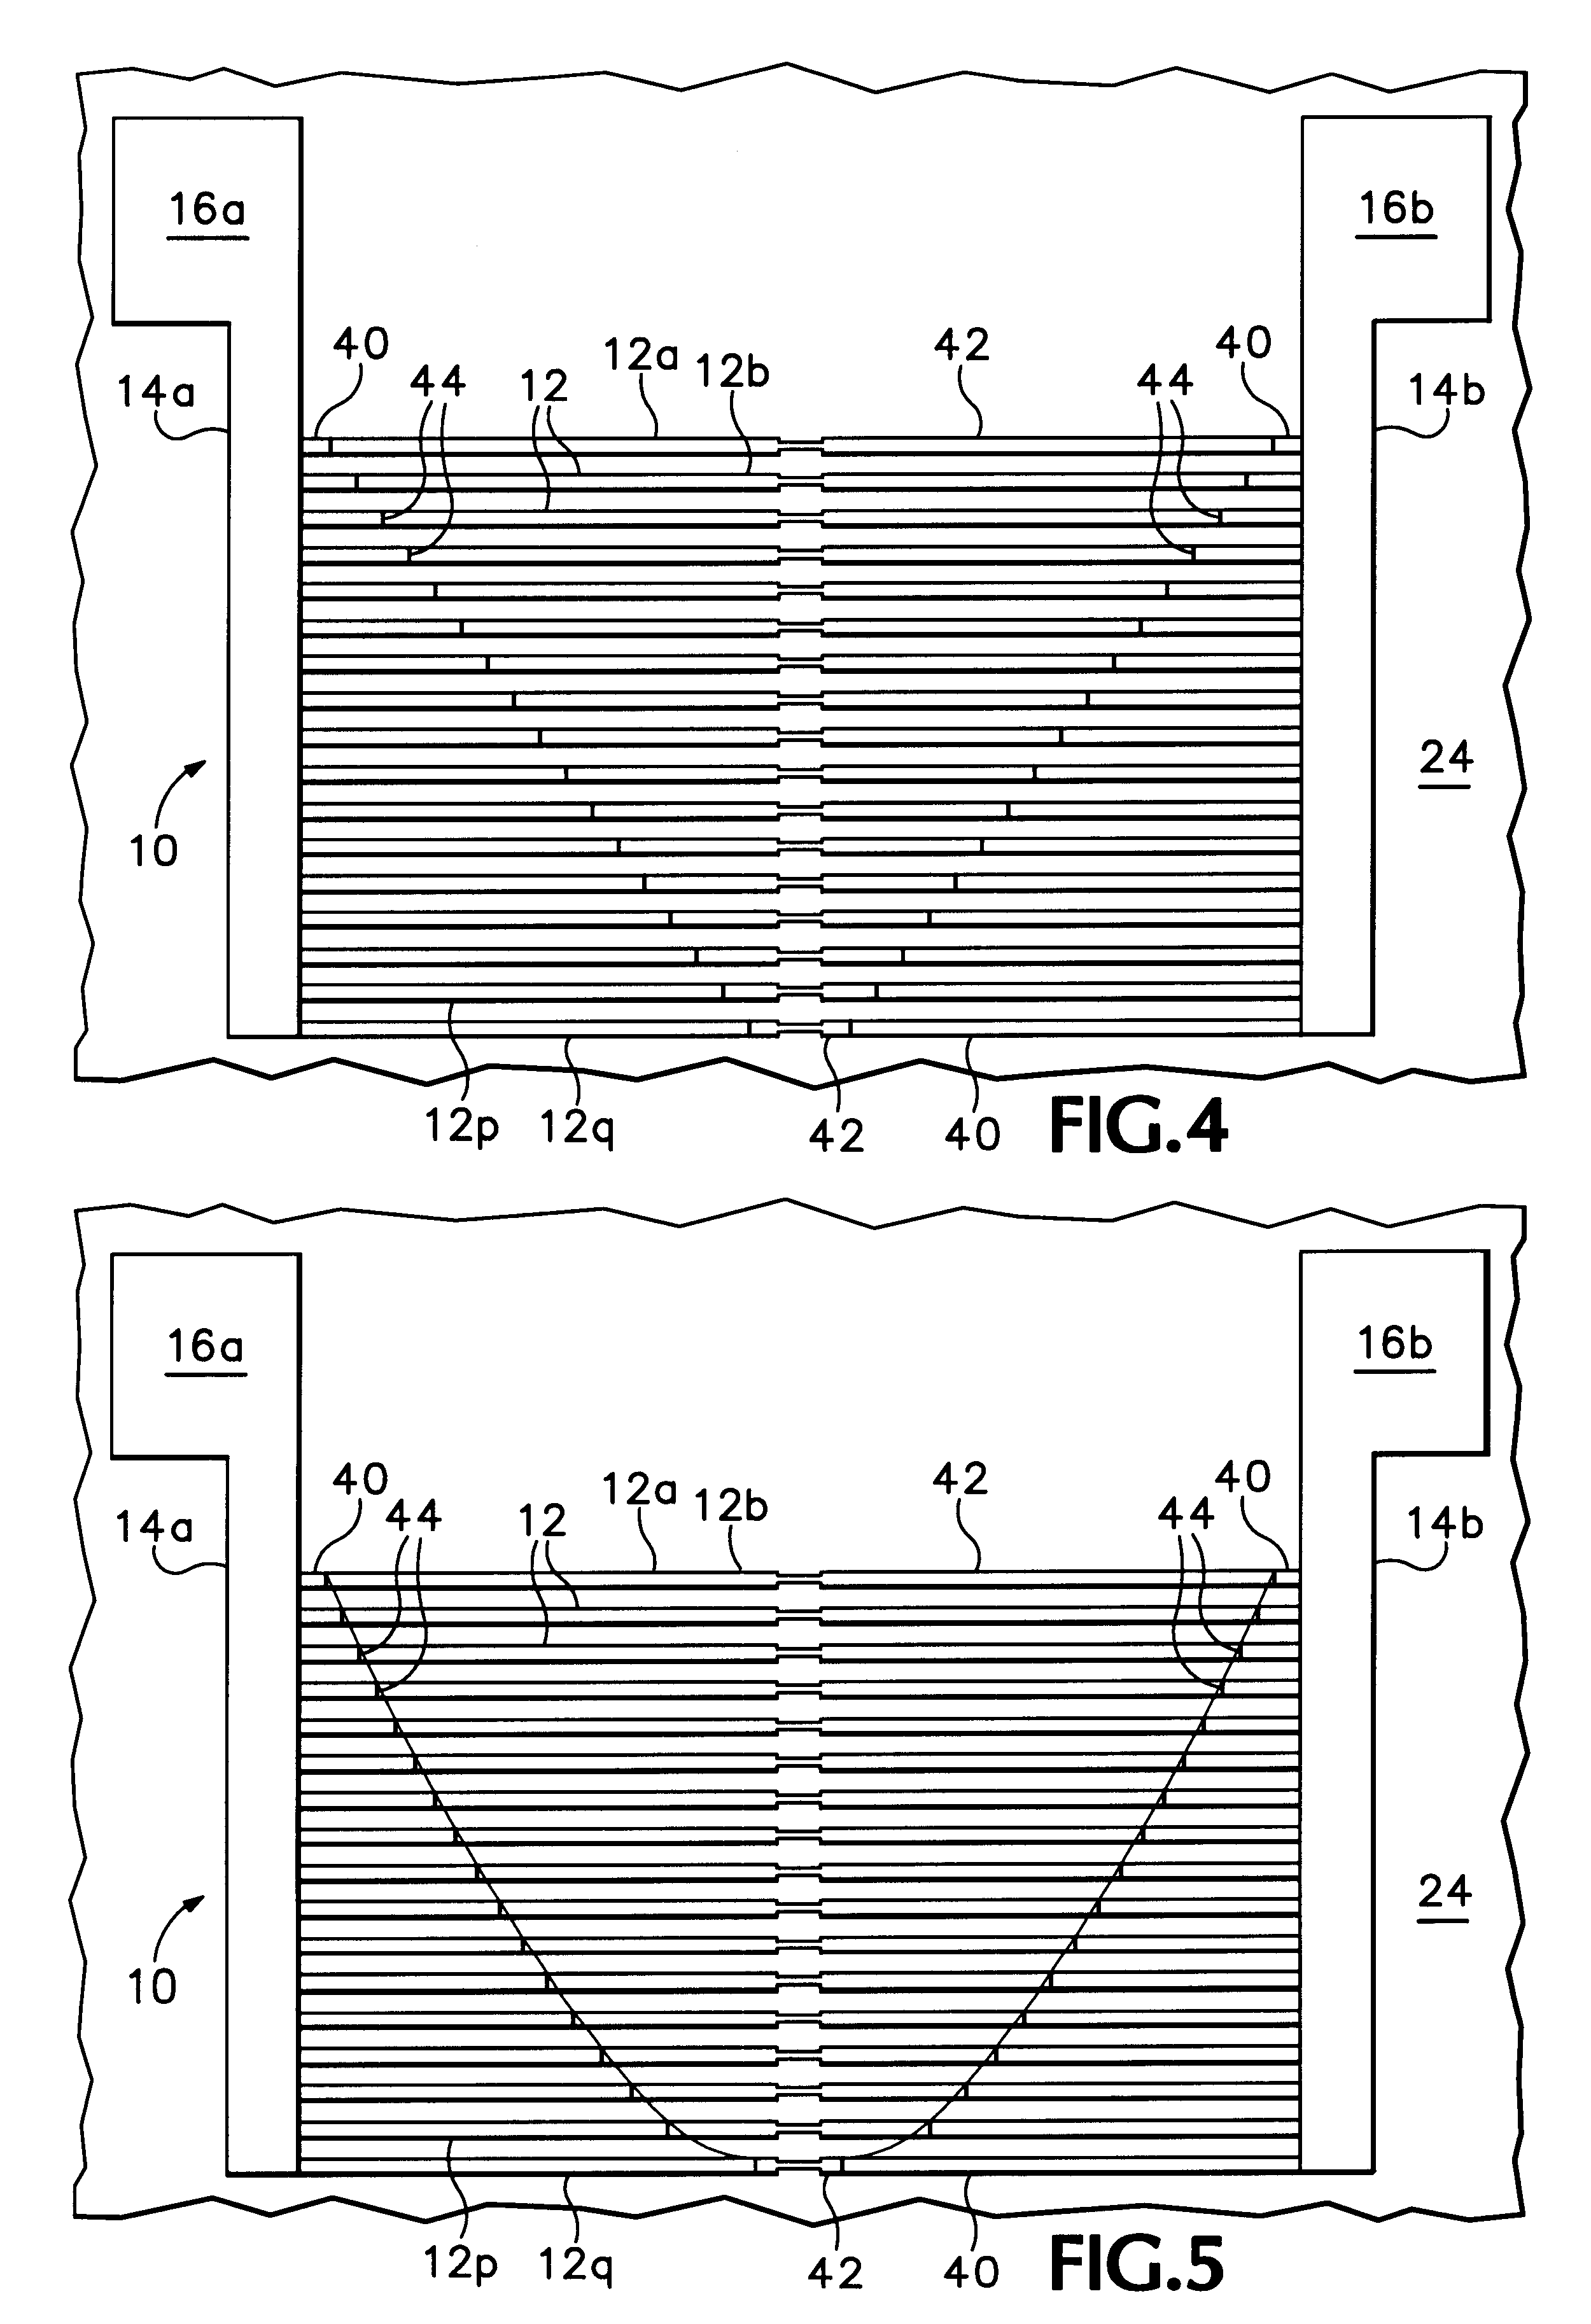 Addressable fuse array for circuits and mechanical devices